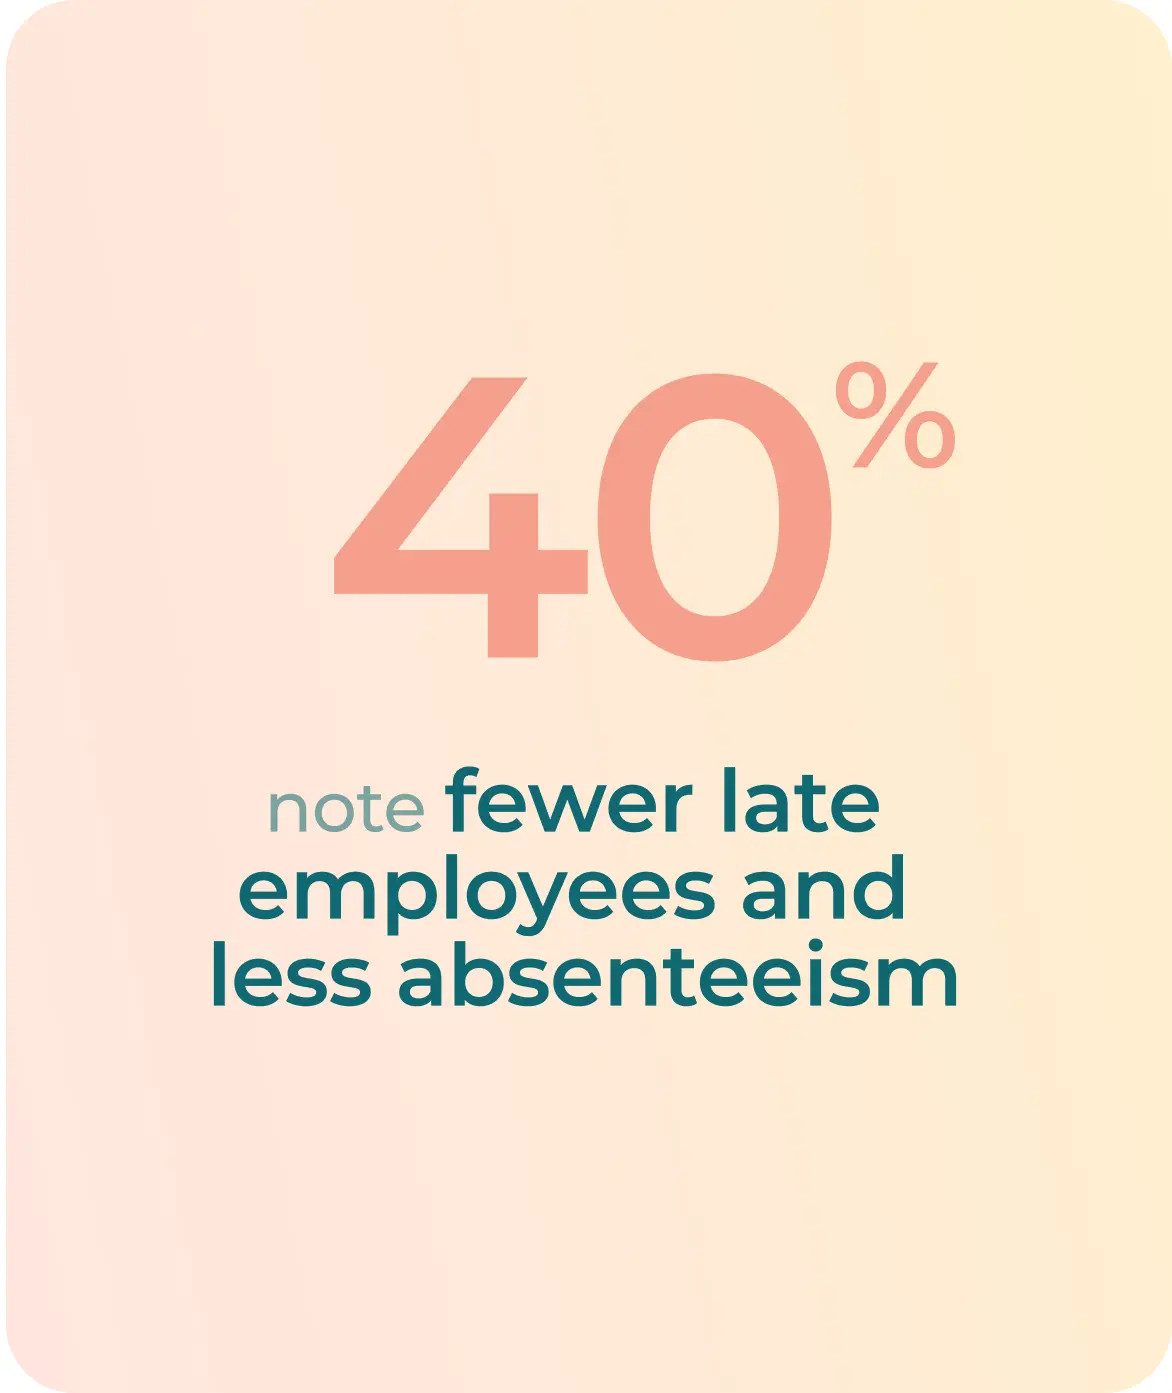 40% note fewer late employees and less absenteeism